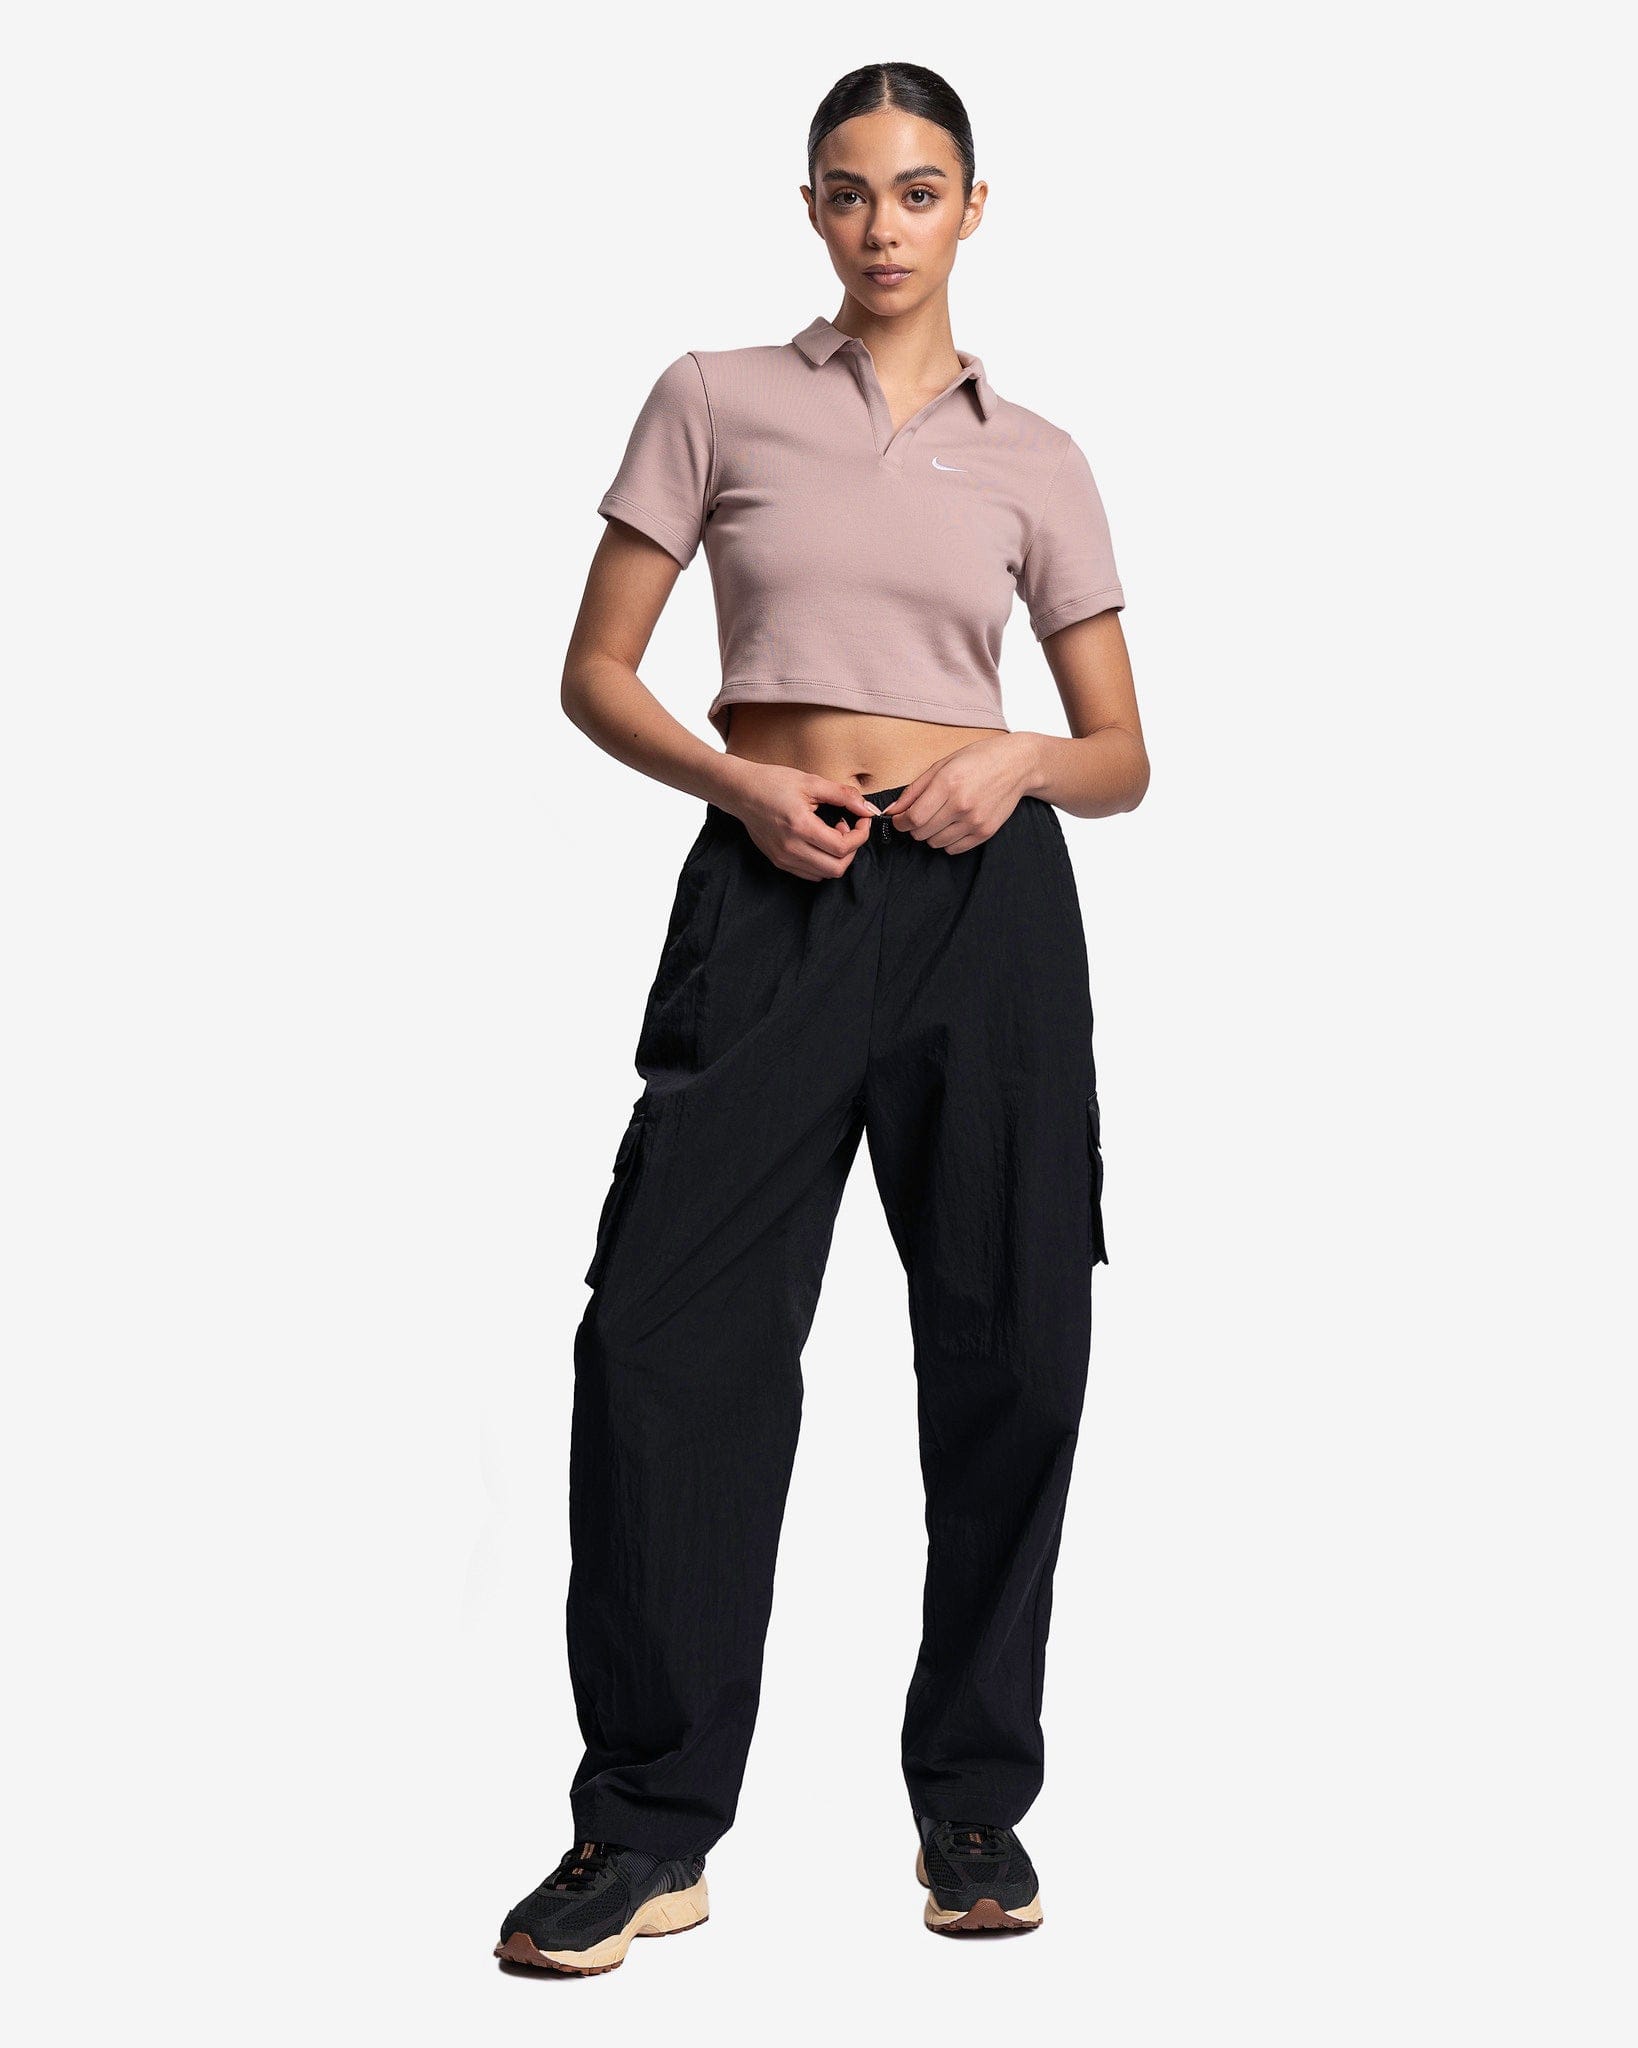 US Polo Association Women's Track Pants (UWTP0033_Purple_28) : Amazon.in:  Clothing & Accessories